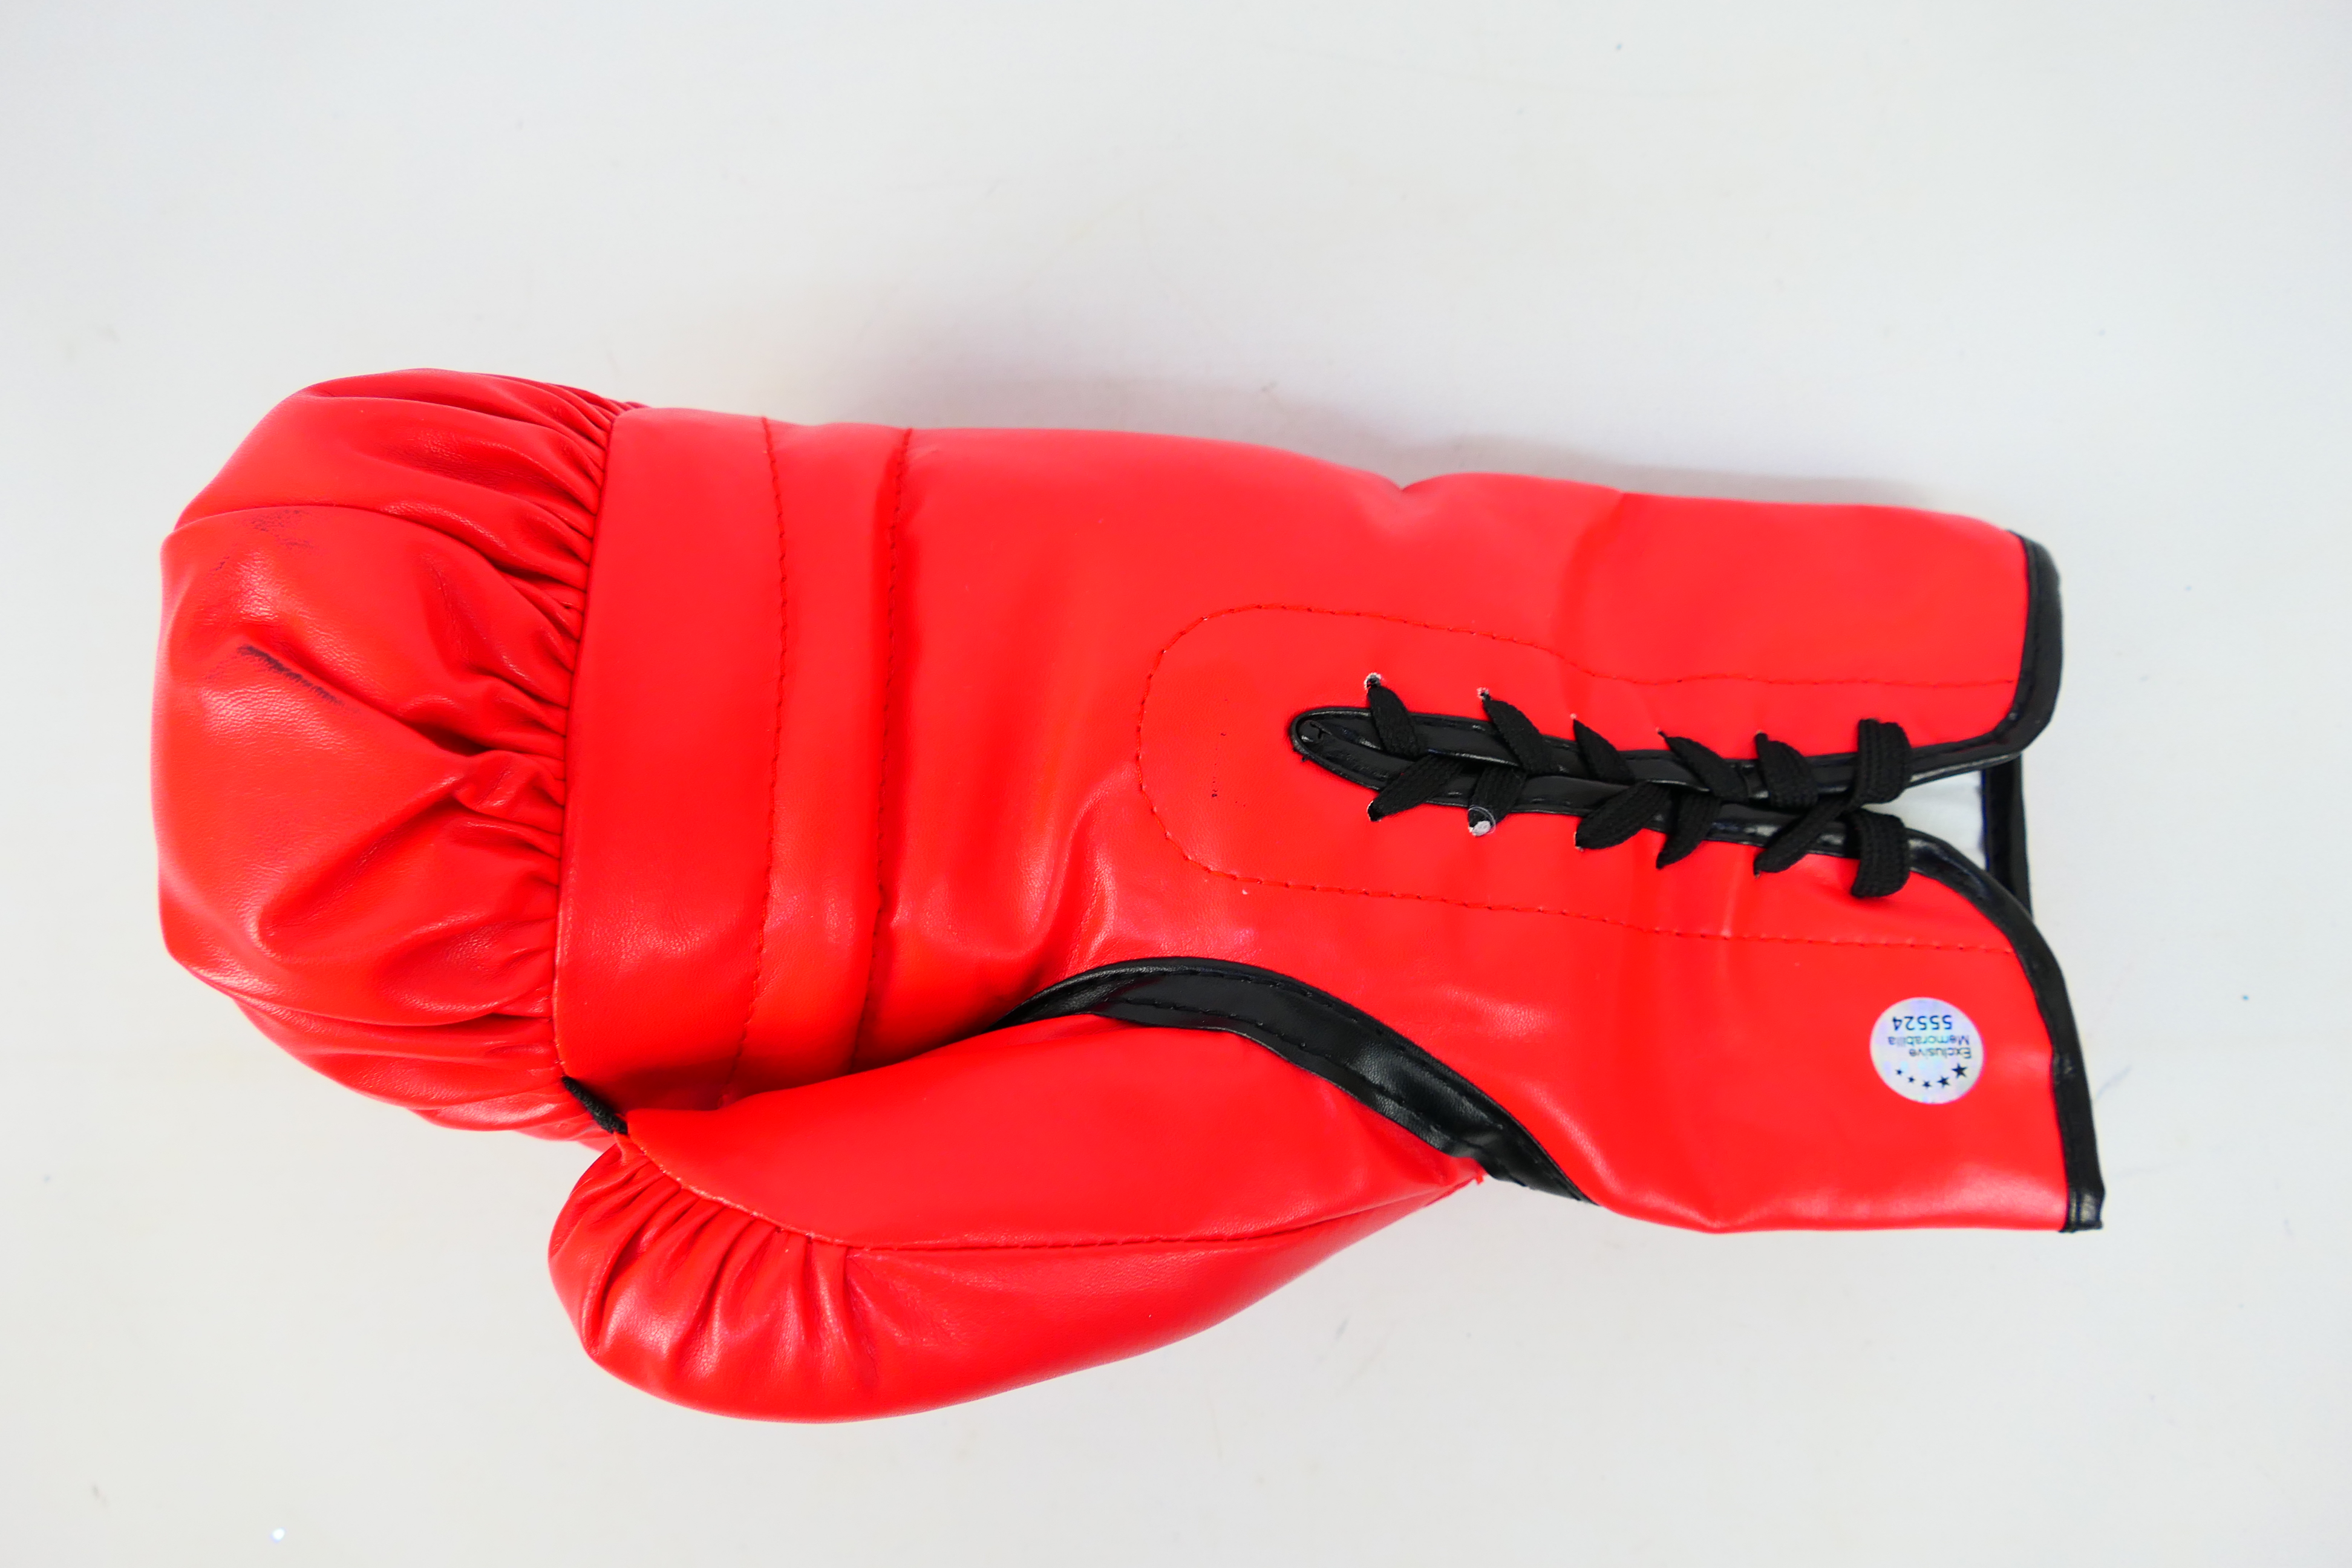 Boxing Interest - A red Everlast boxing glove signed by WBC Heavyweight Champion Tyson Fury, - Image 3 of 6